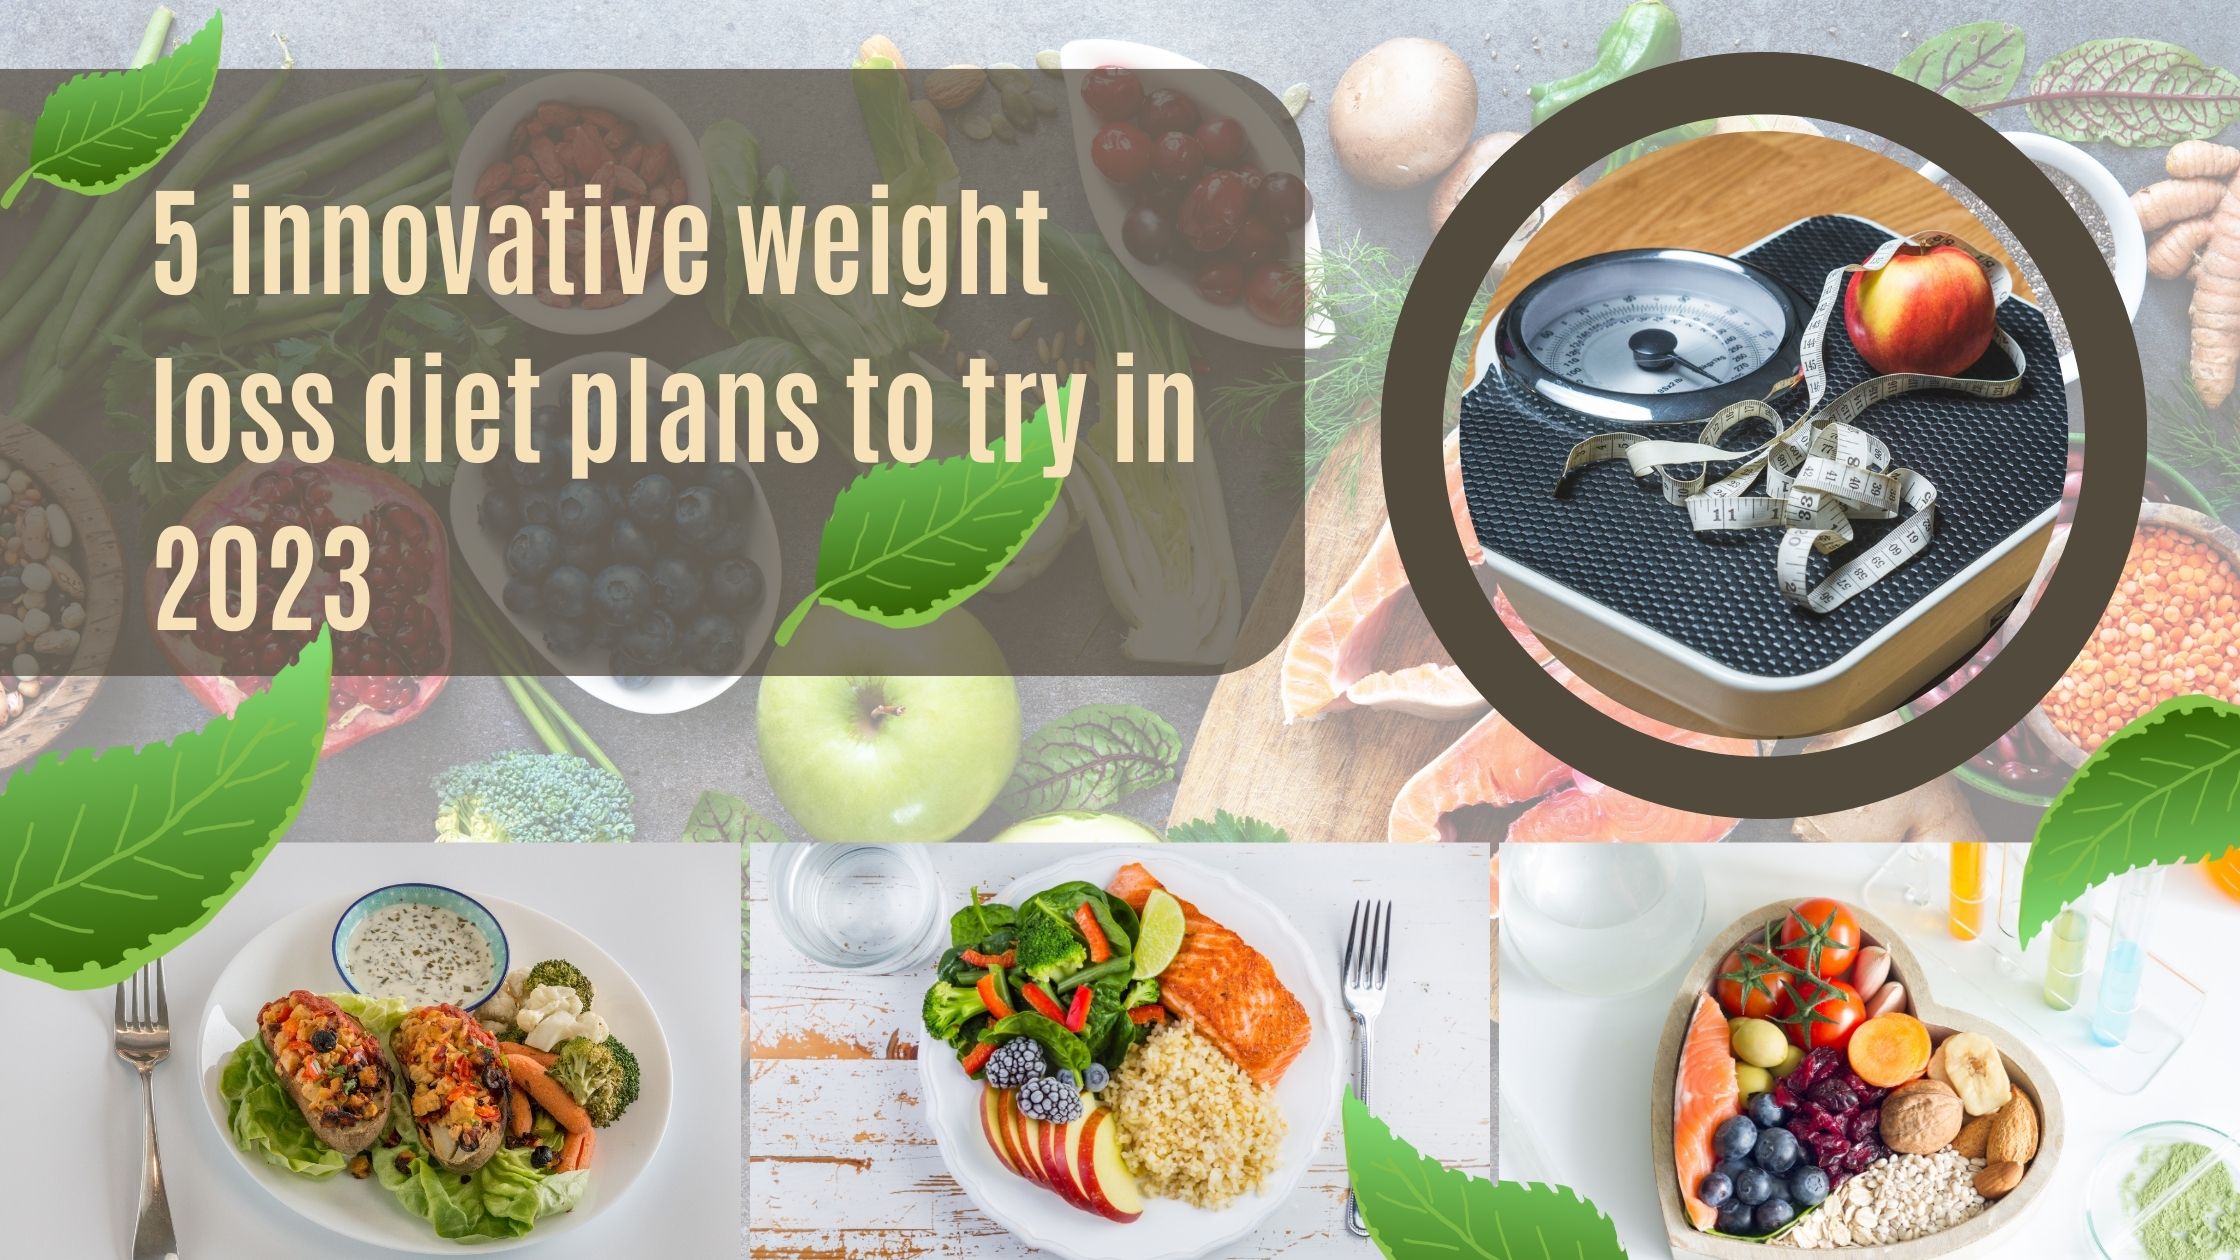 5 innovative weight loss diet plans to try in 2023